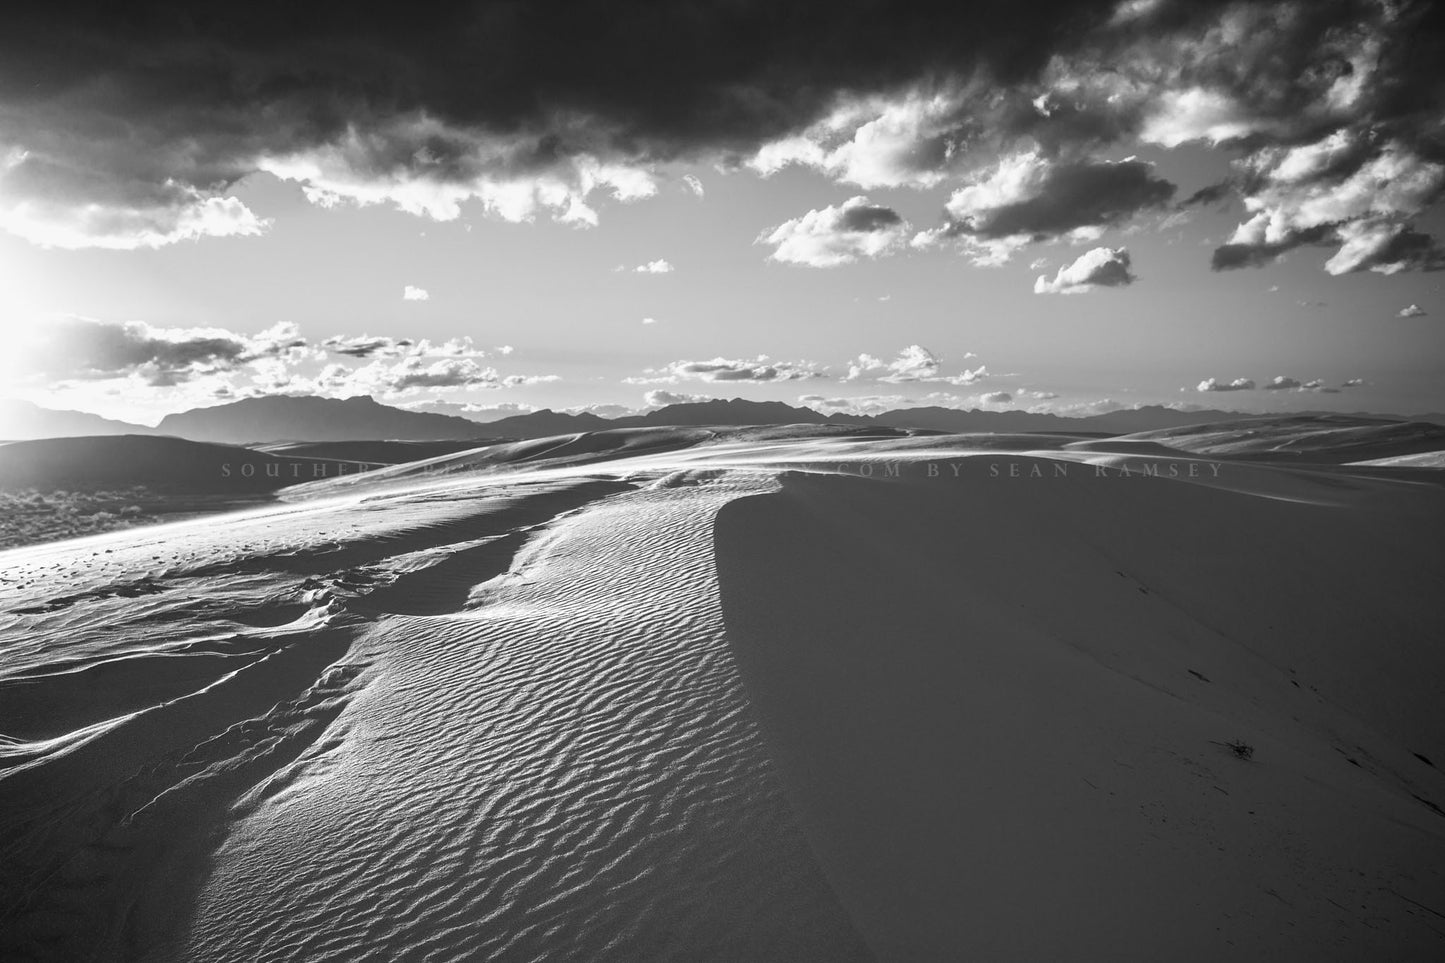 Desert photography print of sand dunes in sunlight at White Sands National Park, New Mexico in black and white by Sean Ramsey of Southern Plains Photography.